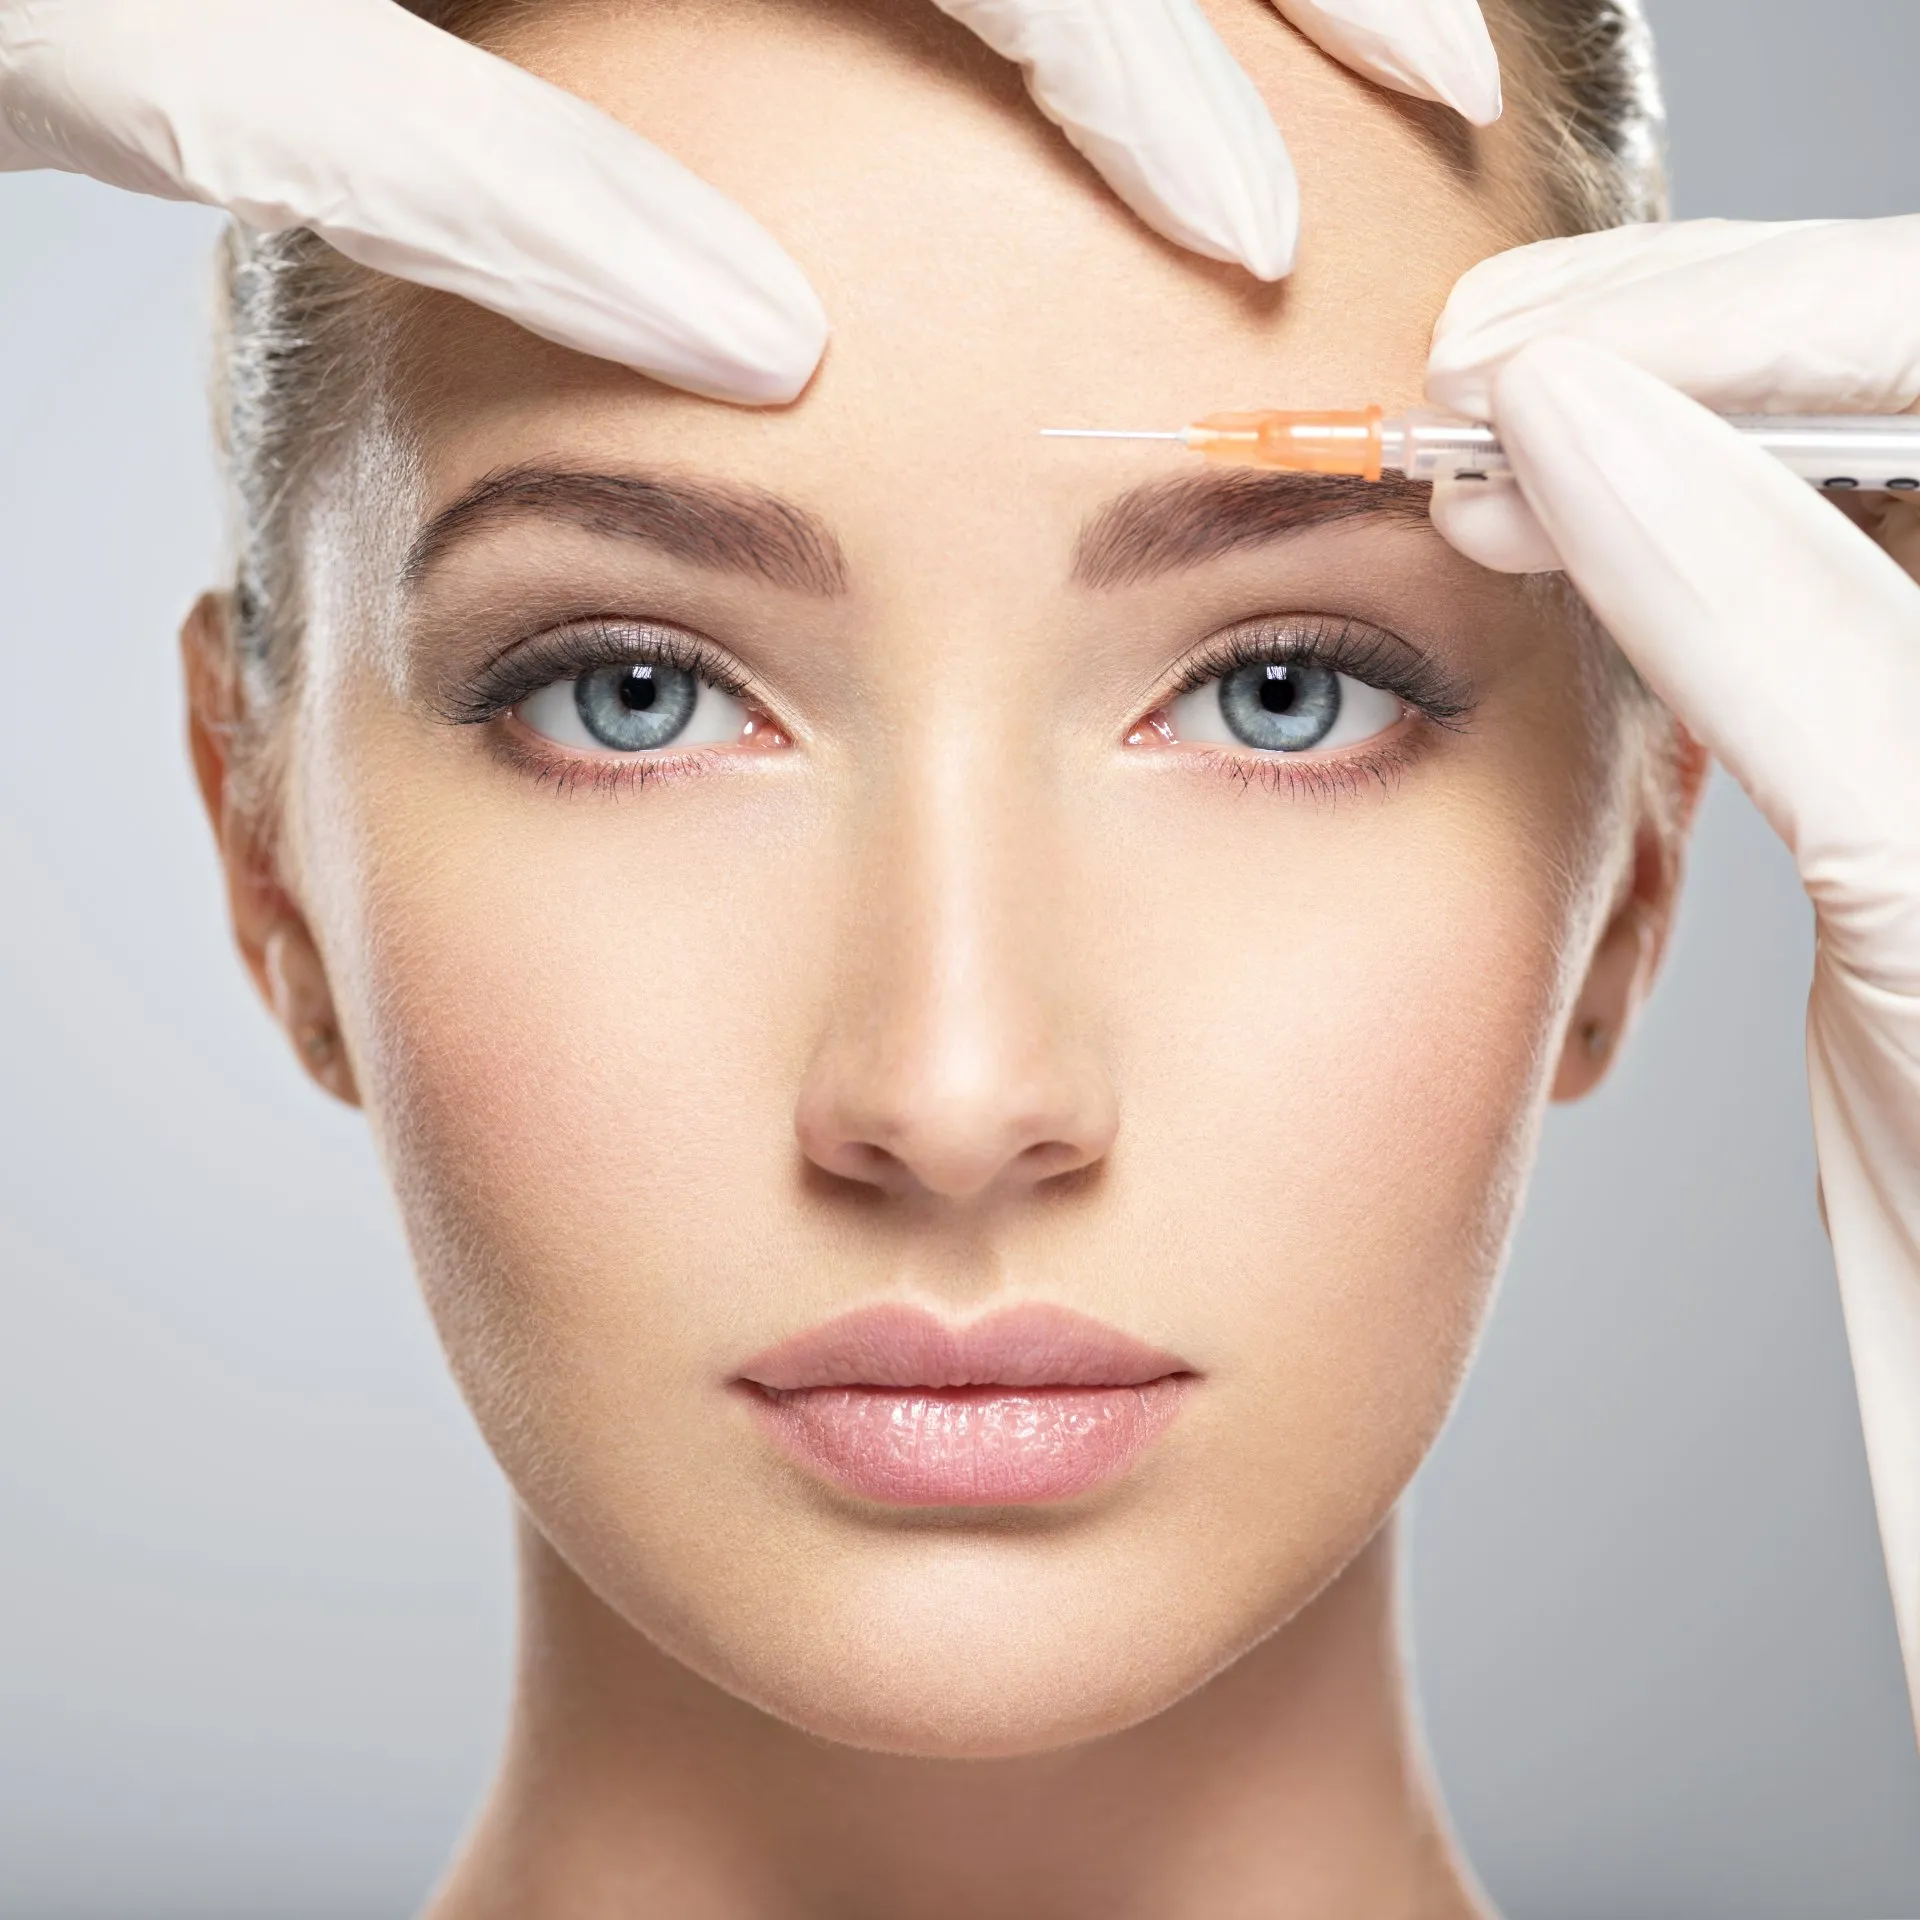 Beautiful woman receiving Injectables & Lift Services - Skinworks Wellness & Aesthetics Med Spa - Hendersonville, TN